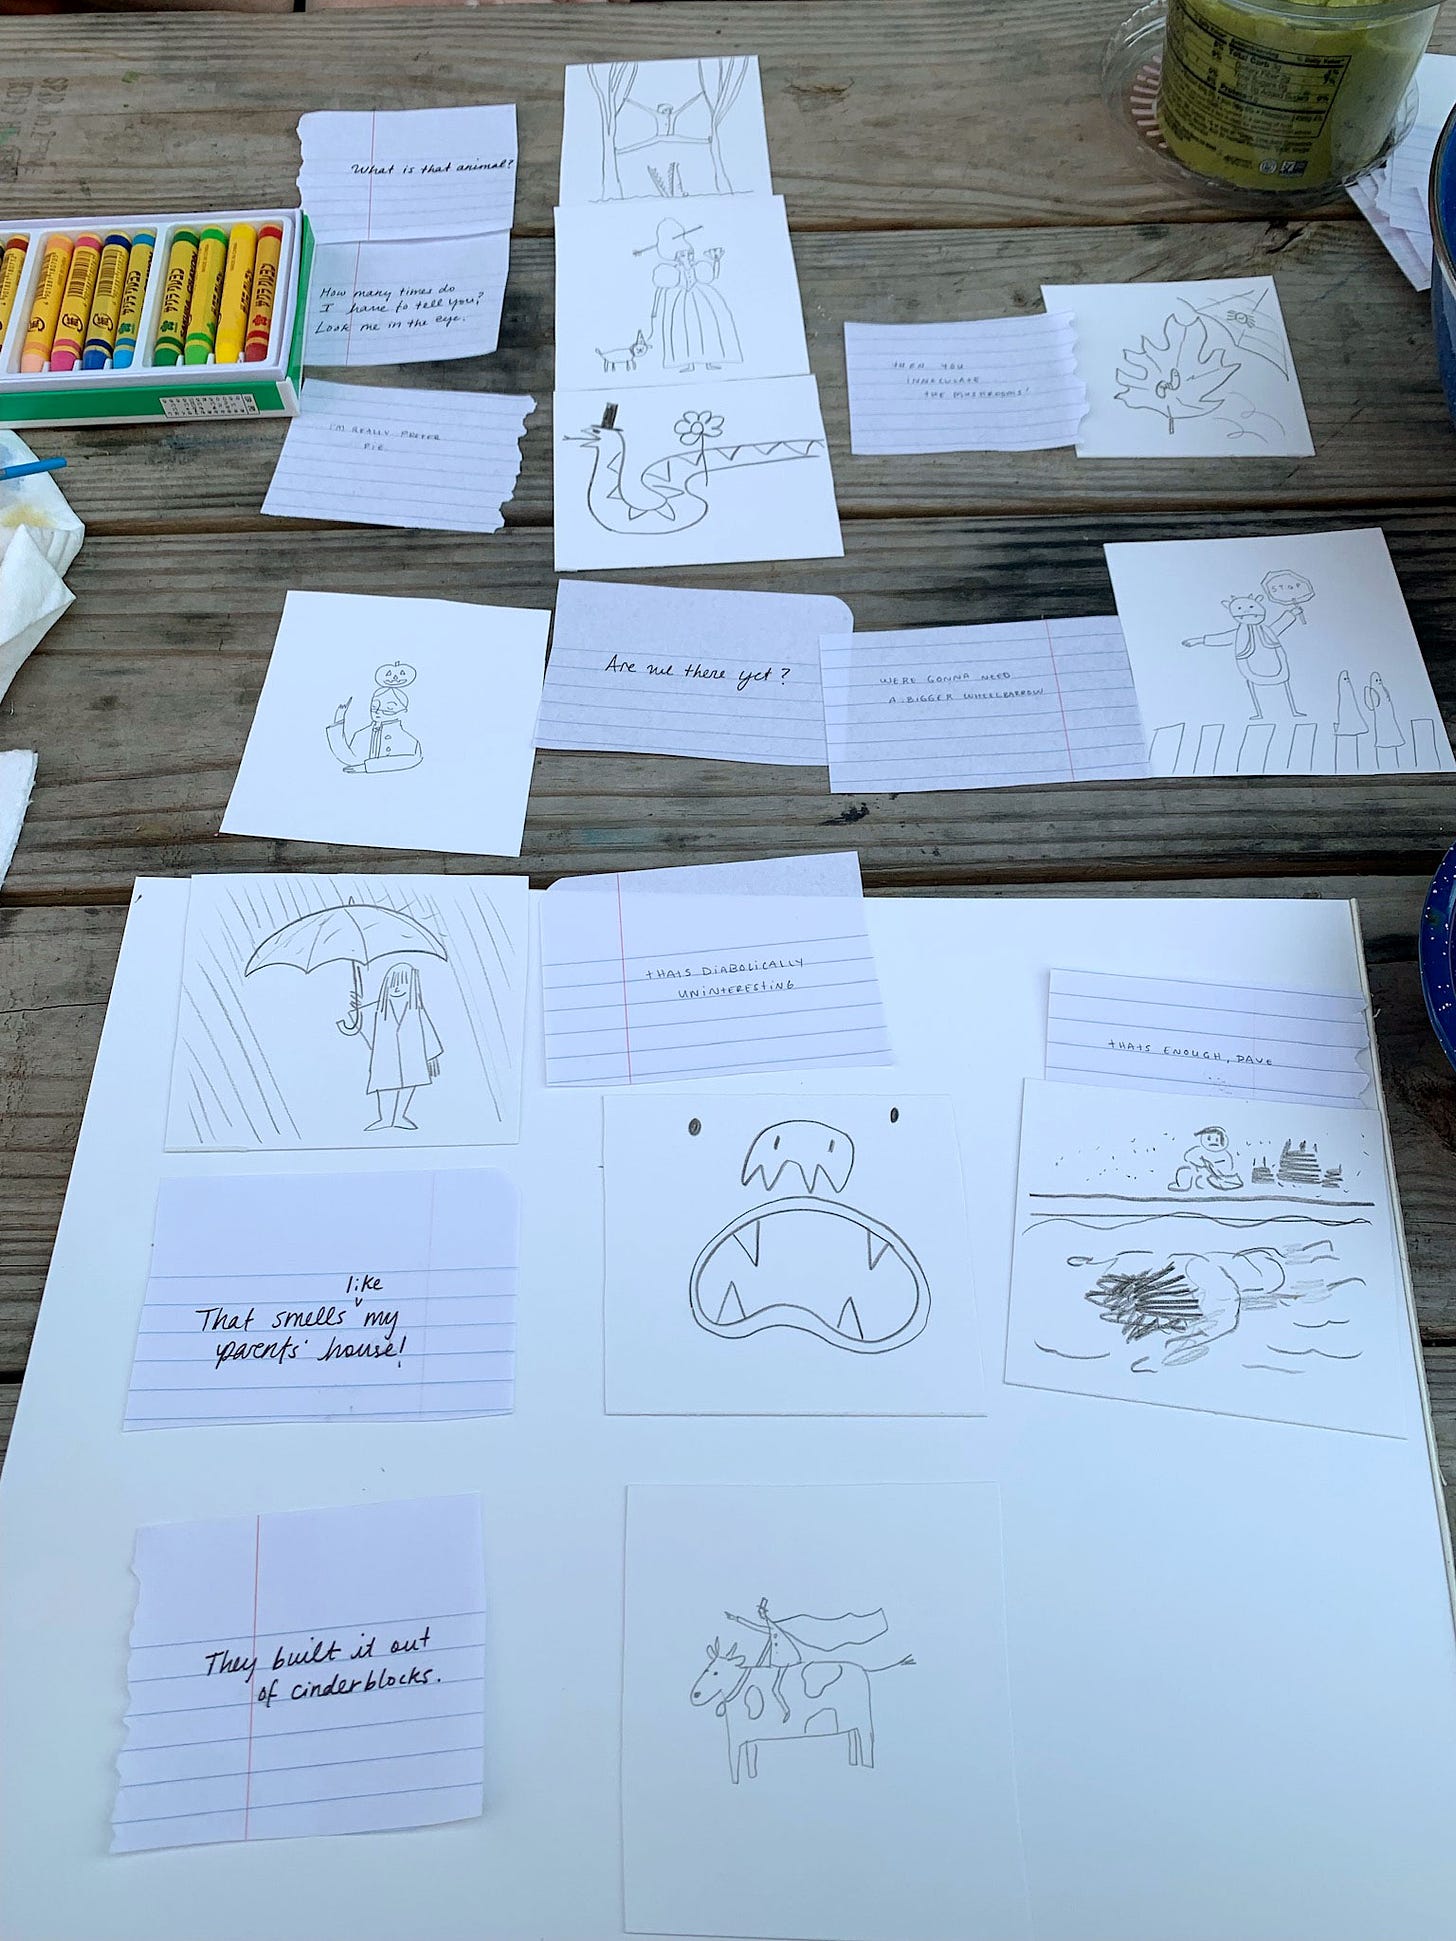 A game of connections for illustrators and writers. Ideation for stories and characters with slips of writings and little drawings Kayla Stark and Vivien Mildenberger